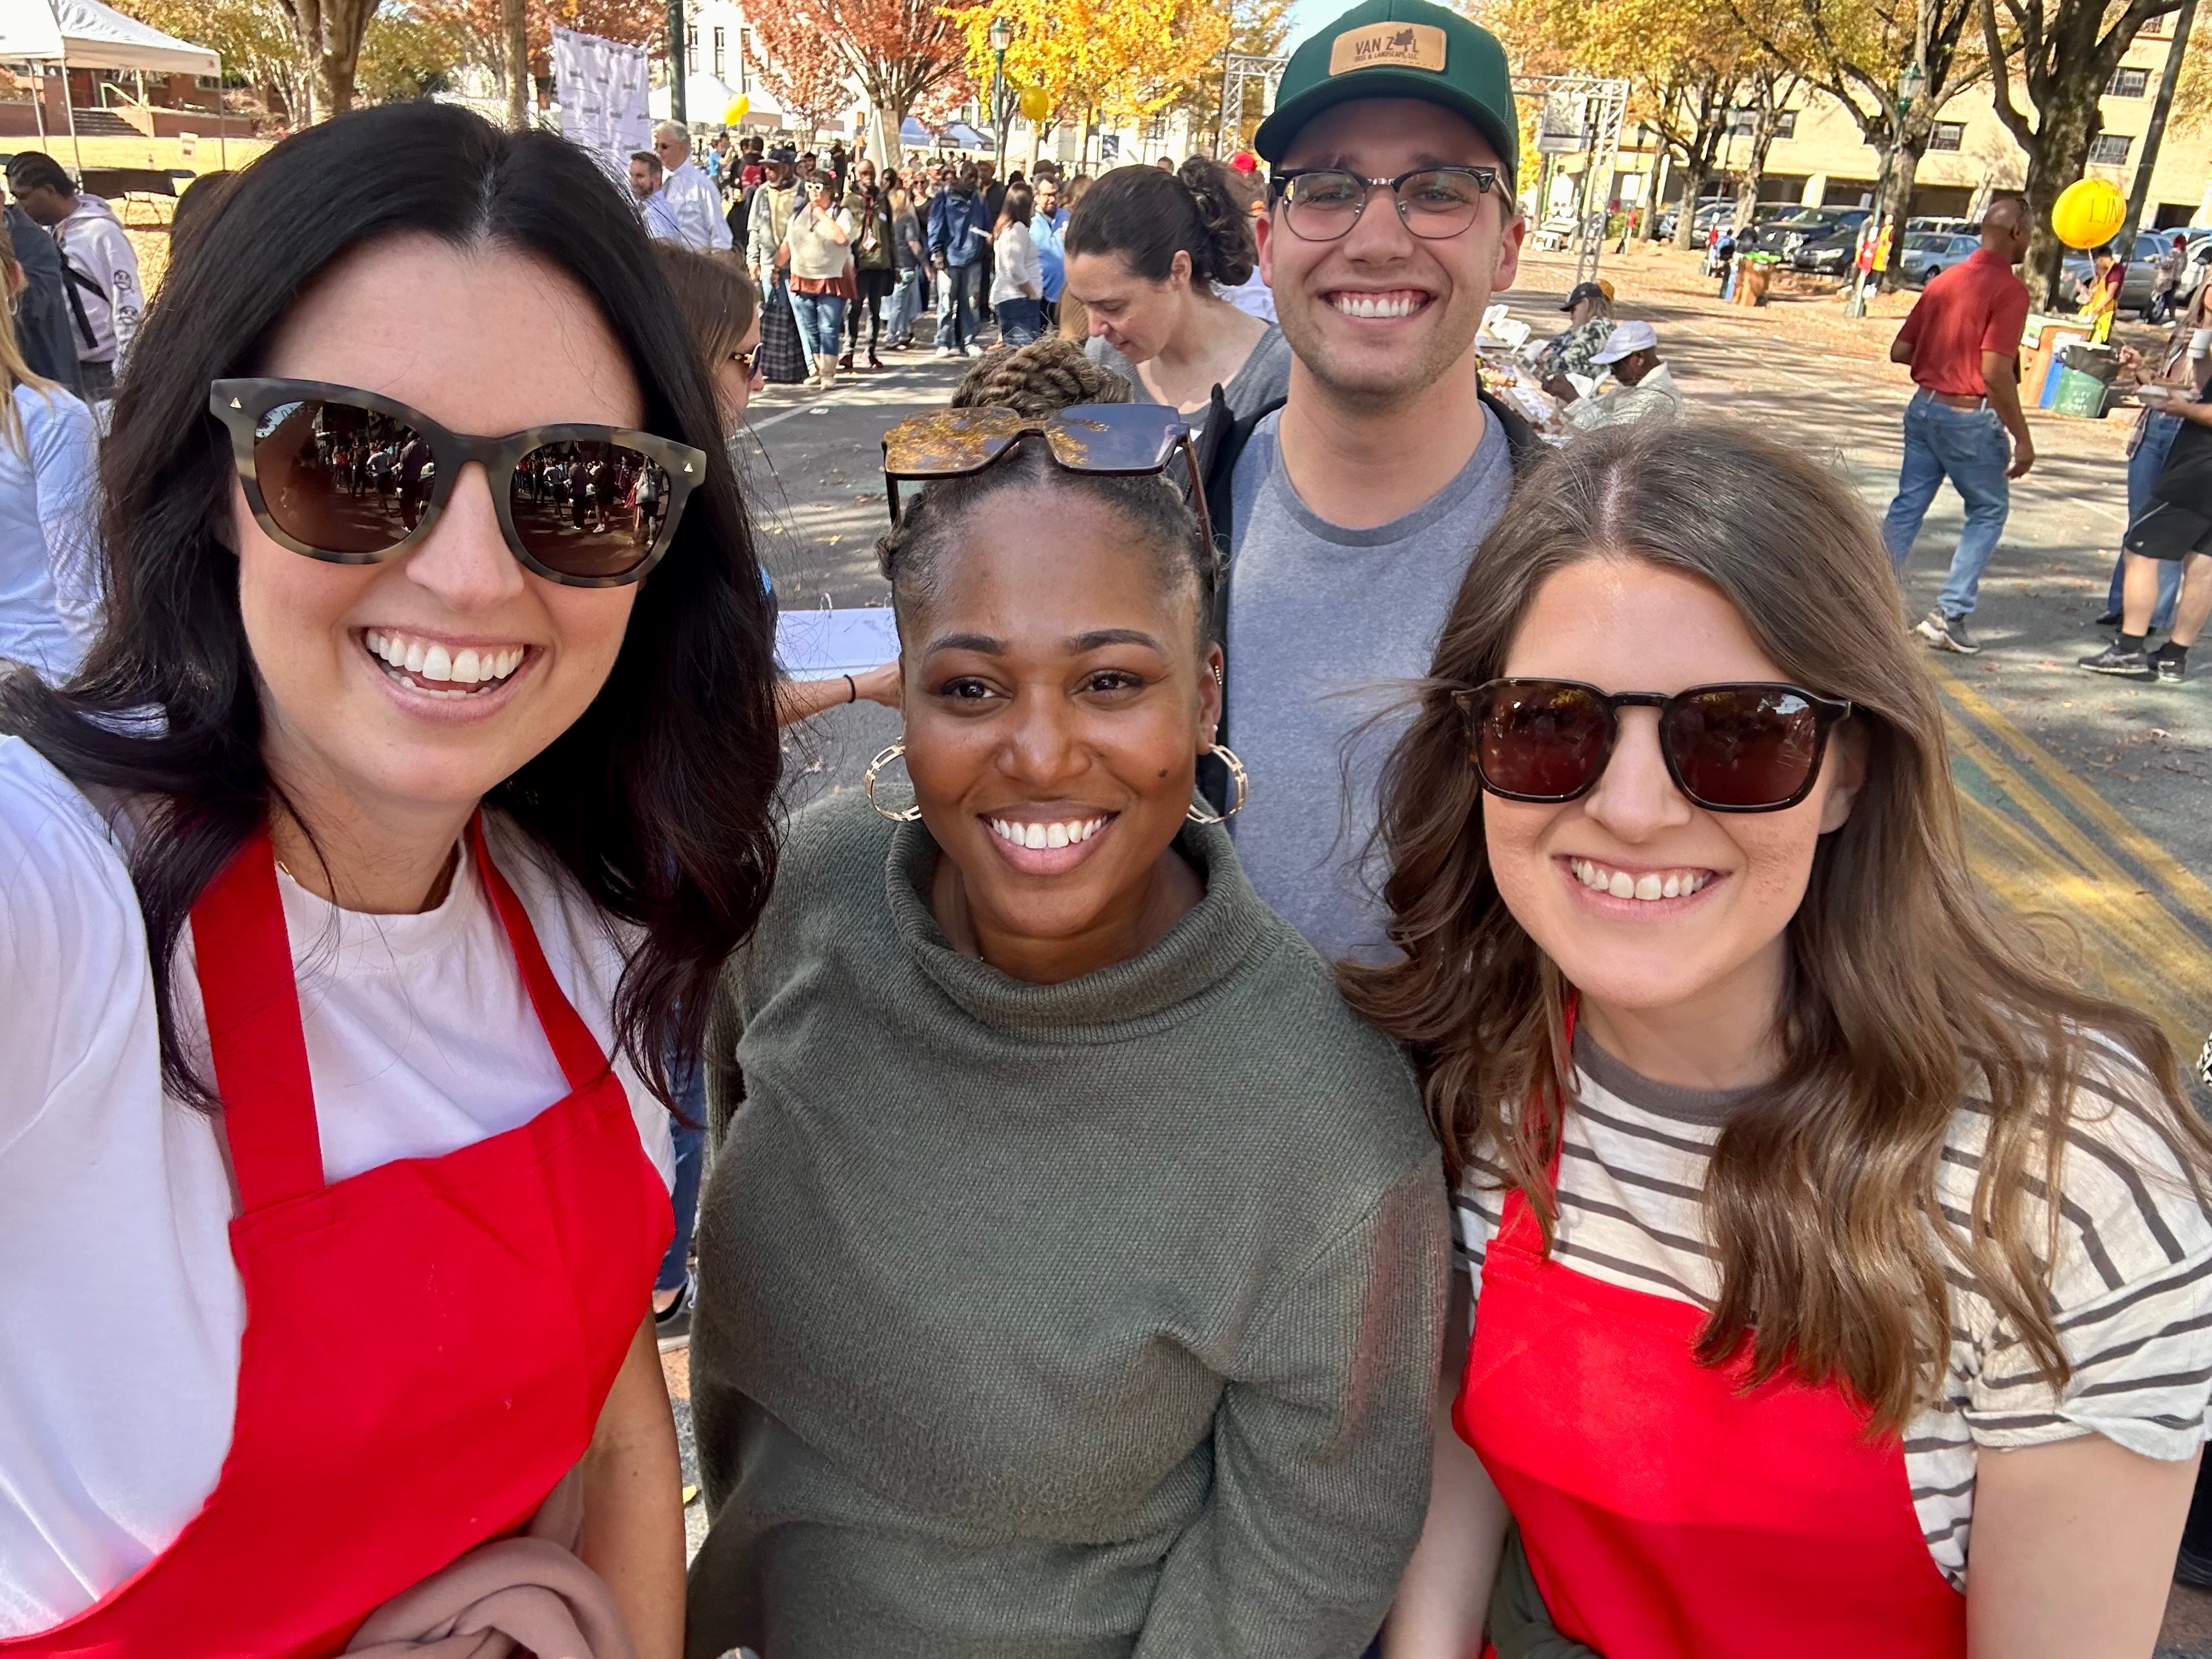 CBL team members volunteer at Gratefull, a community-wide Thanksgiving meal served in the middle of downtown Chattanooga.